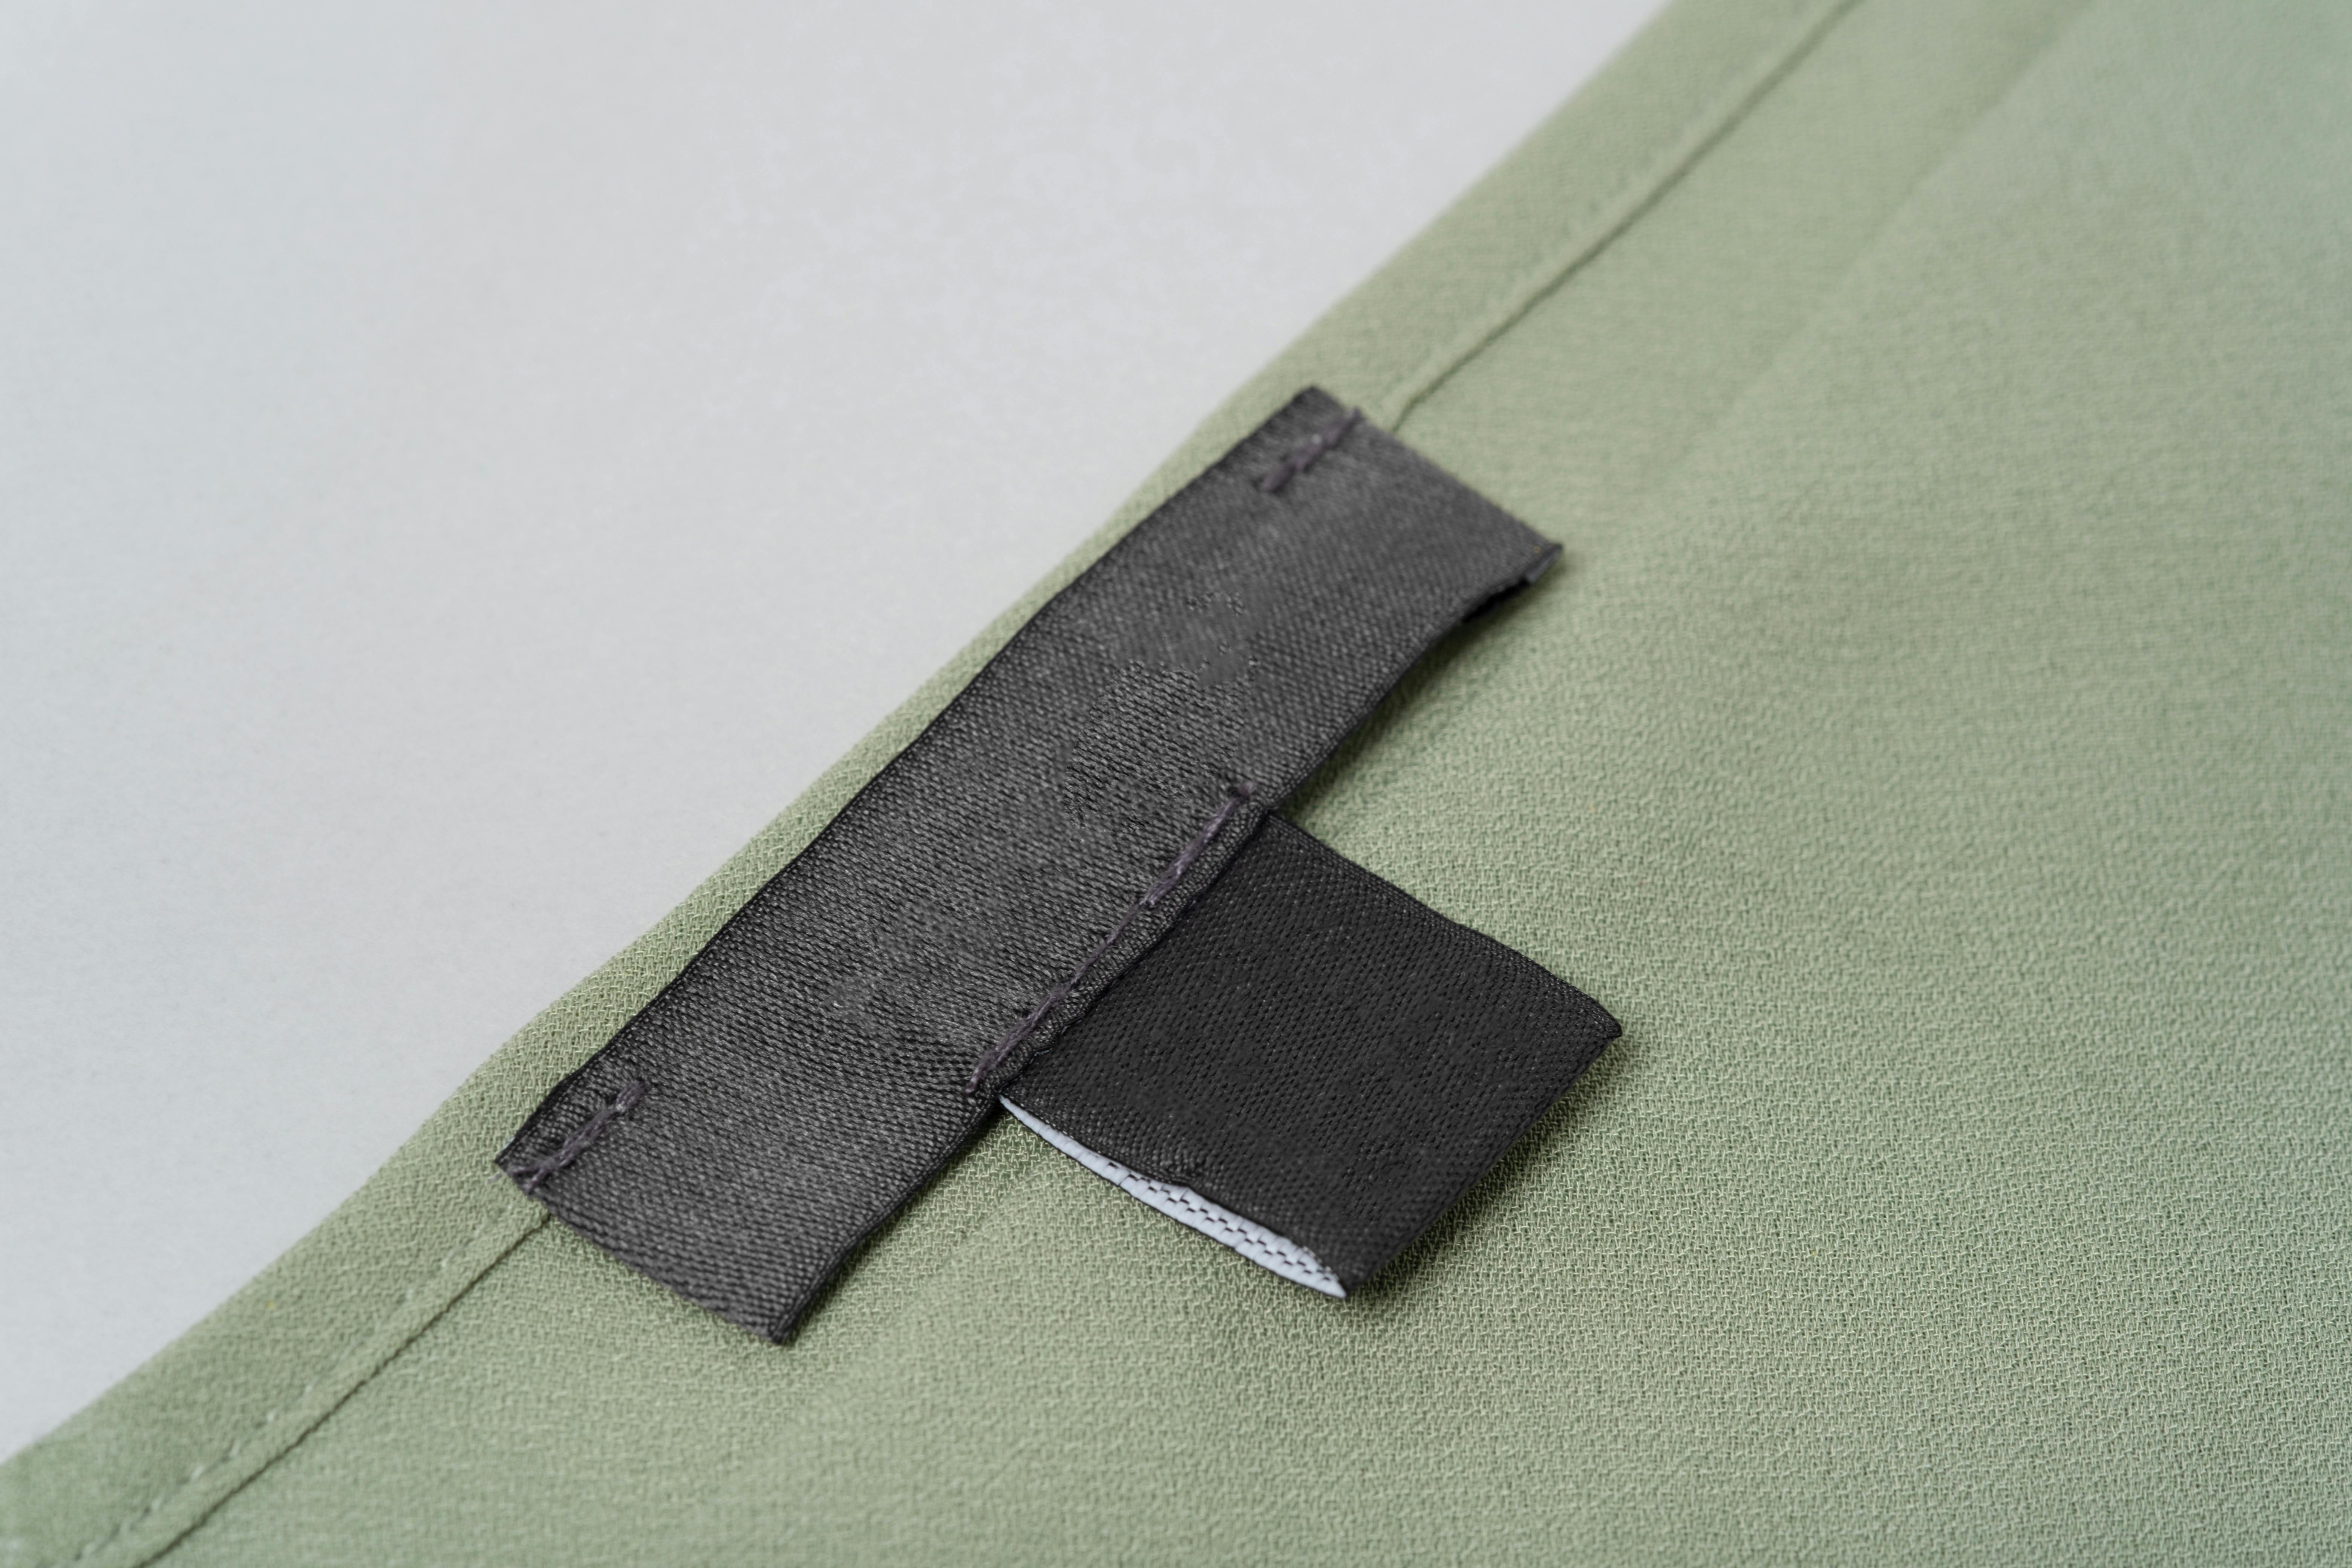  clothing label sewn onto green top